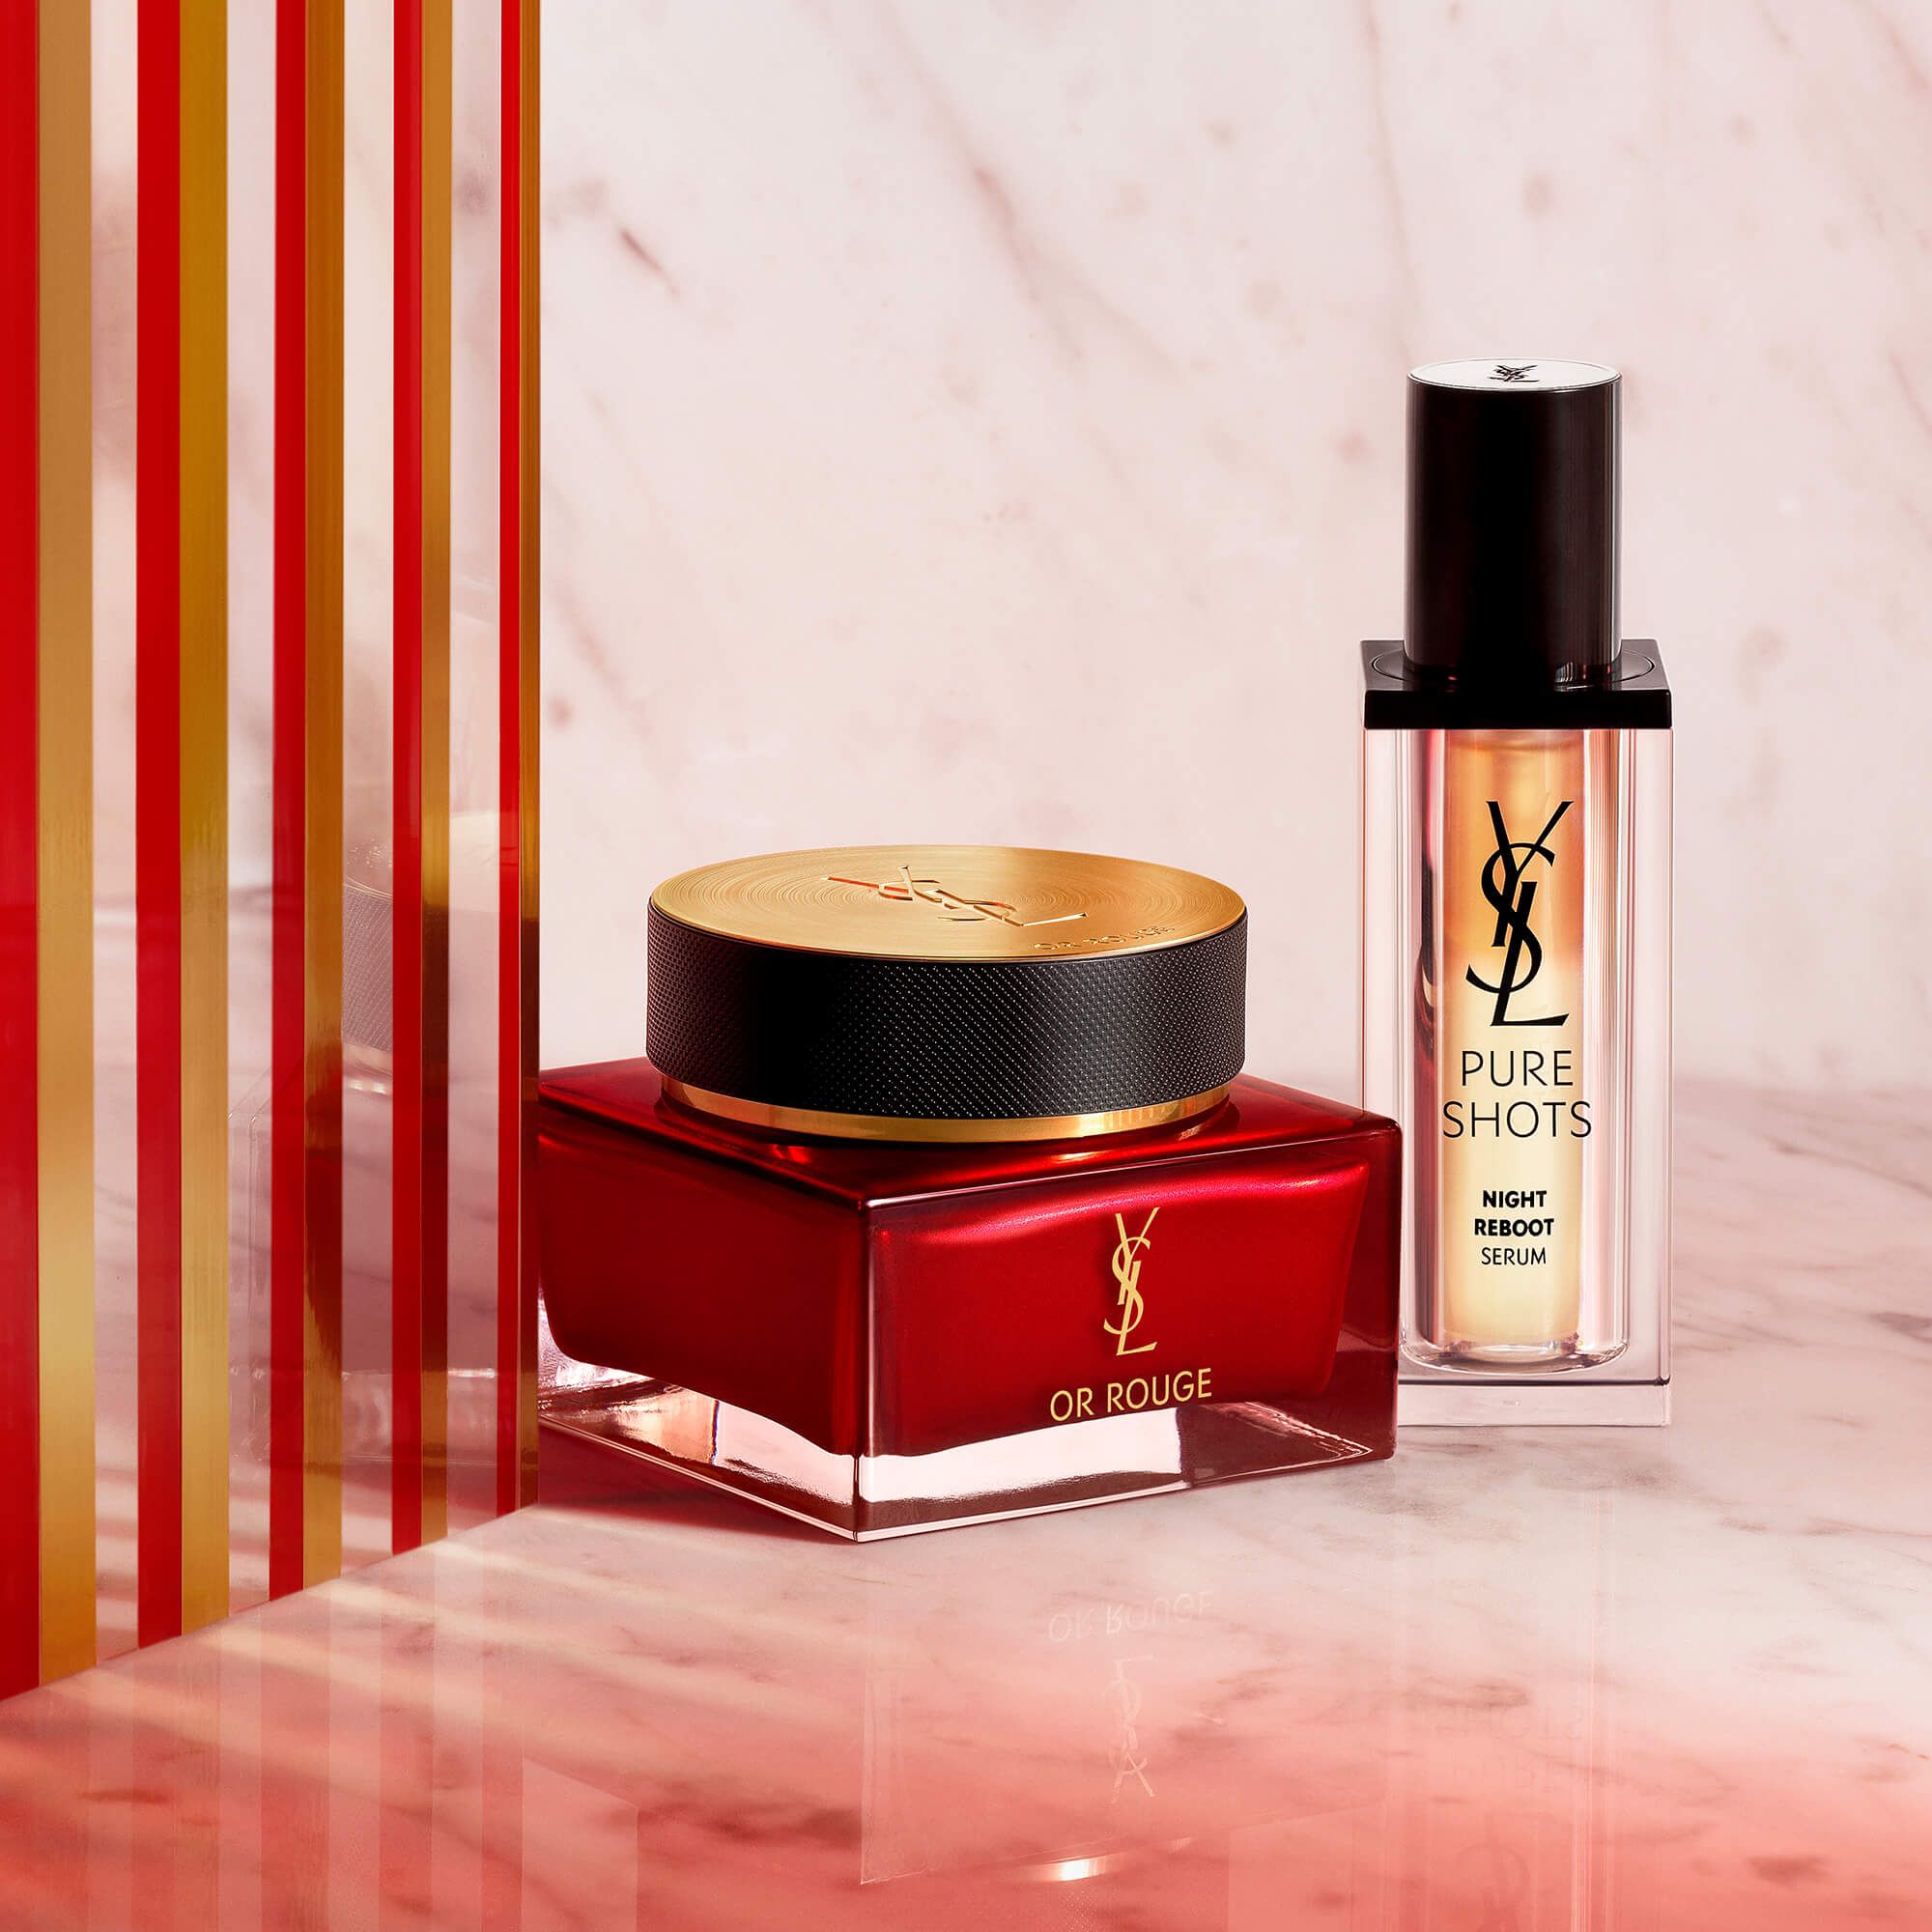 YSL Beauty — Or Rouge - Campagne digitale